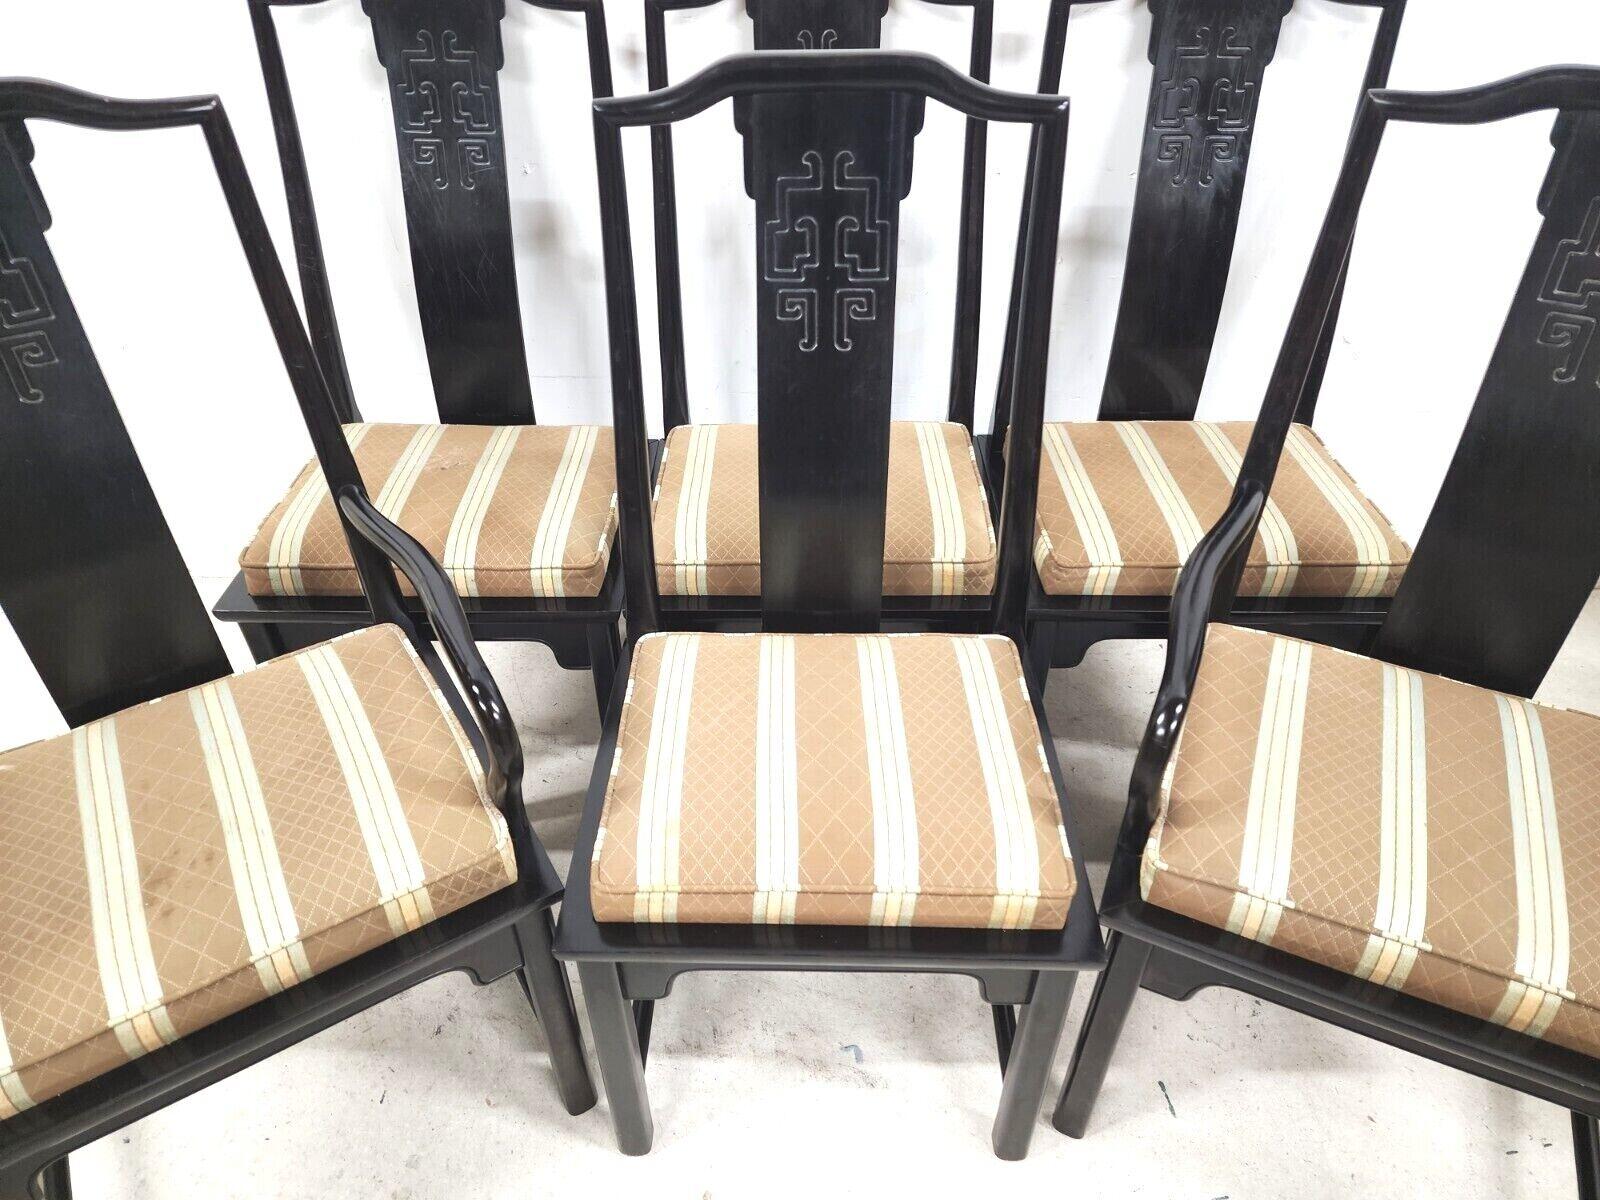 Offering one of our recent Palm Beach Estate fine furniture acquisitions of a 
set of (6) Chin Hua Asian dining chairs Raymond Sobota Century Furniture 
Set includes 2 arm and 4 side chairs.

We also have another set of 4, and another set of 6